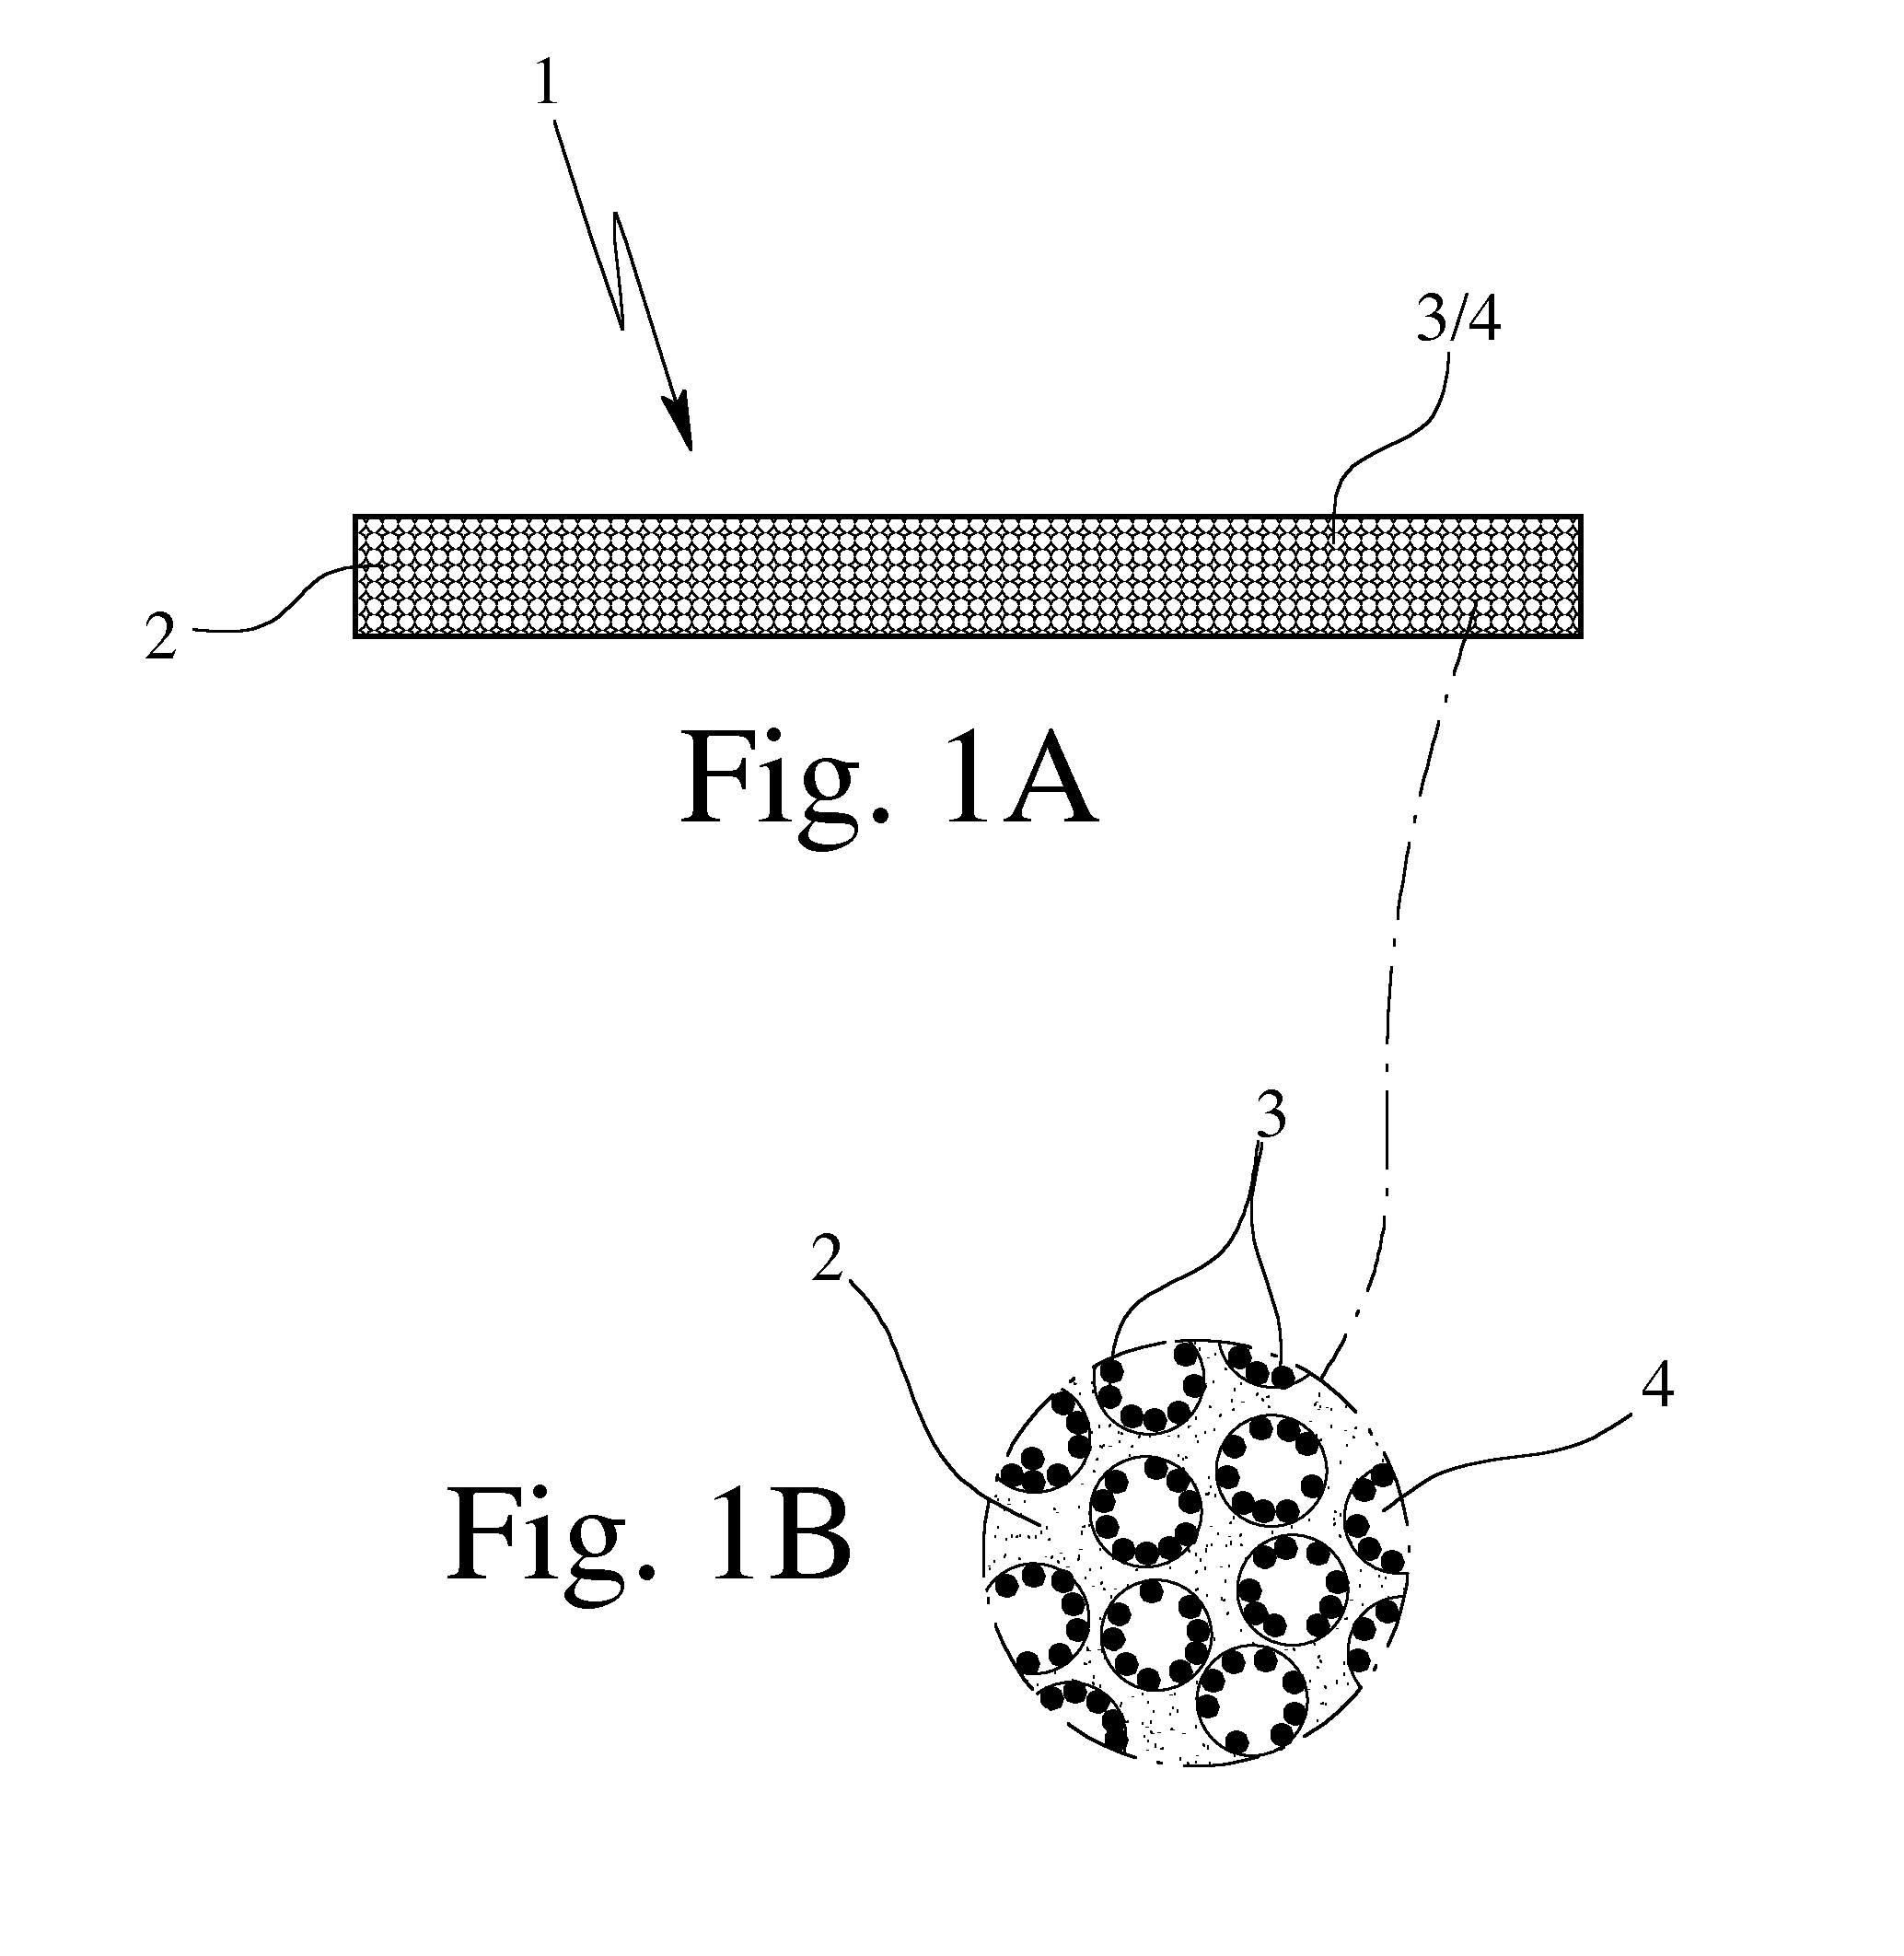 Mat-shaped foam material for cleaning and/or filtering air